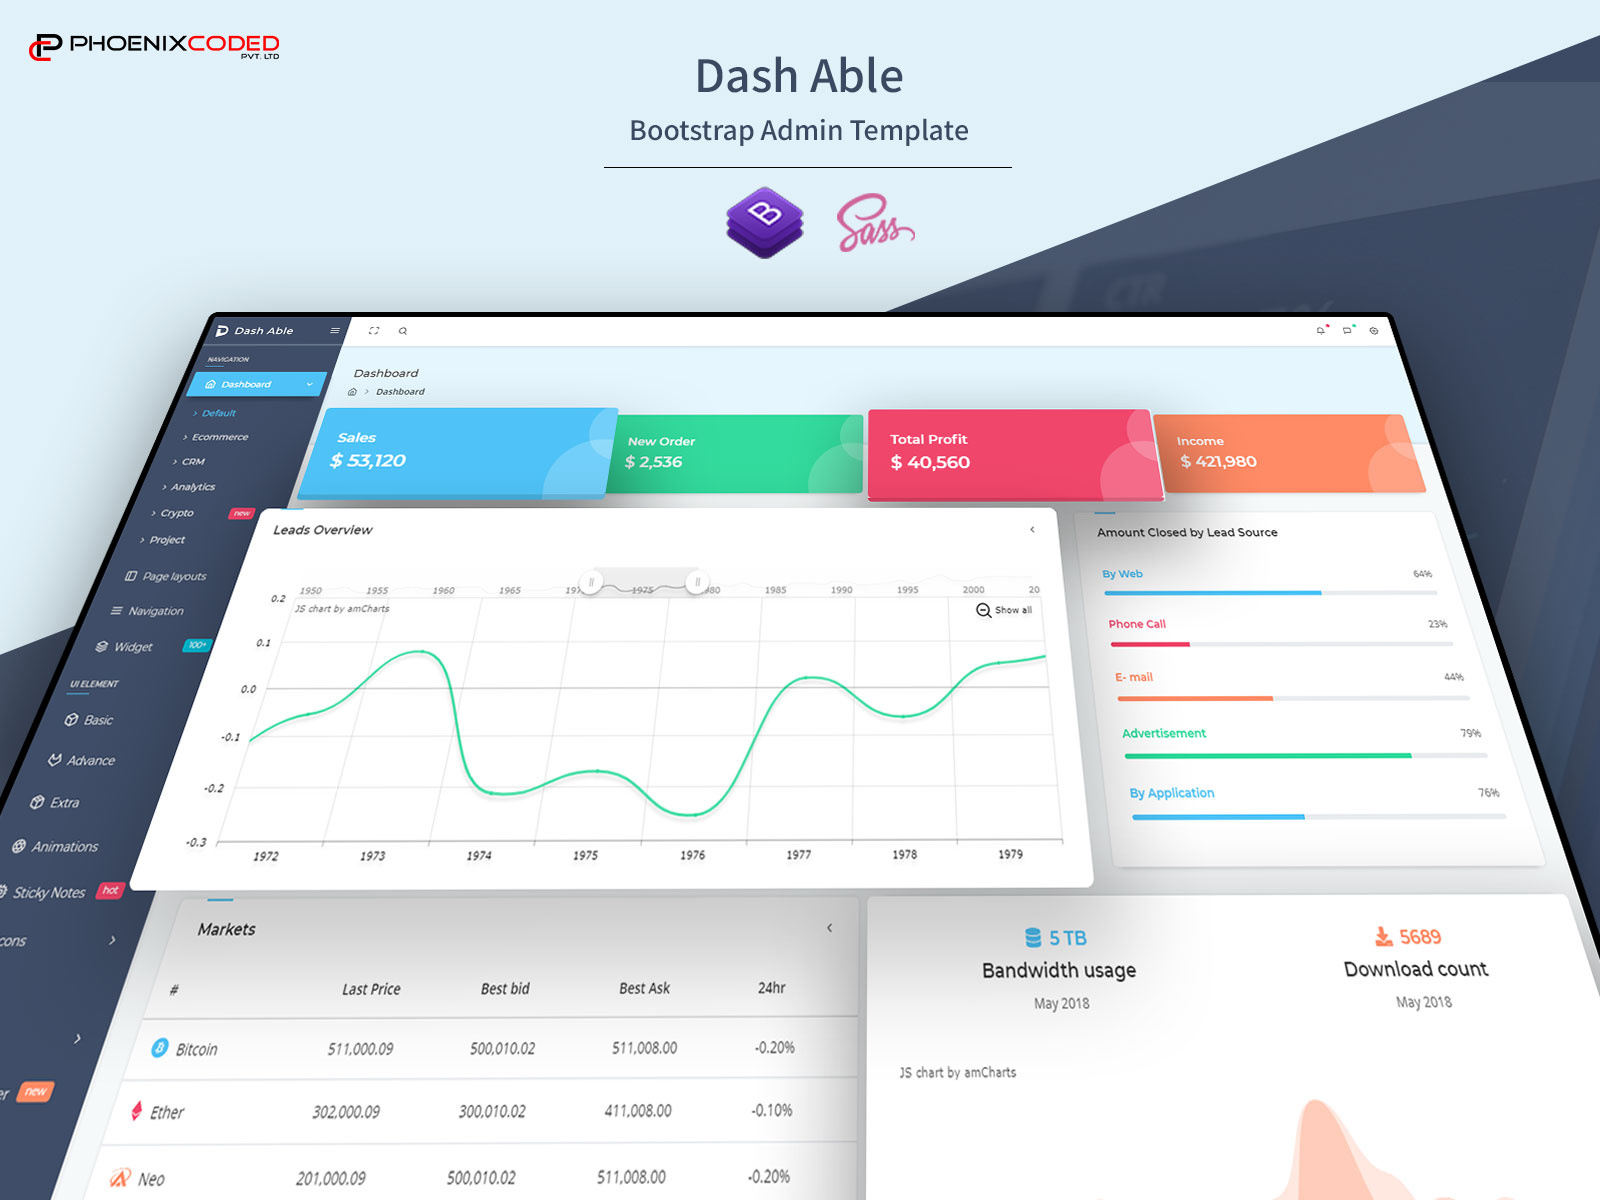 Dash Able Bootstrap Admin Template By Phoenixcoded On Dribbble for Dash Kit Bootstrap